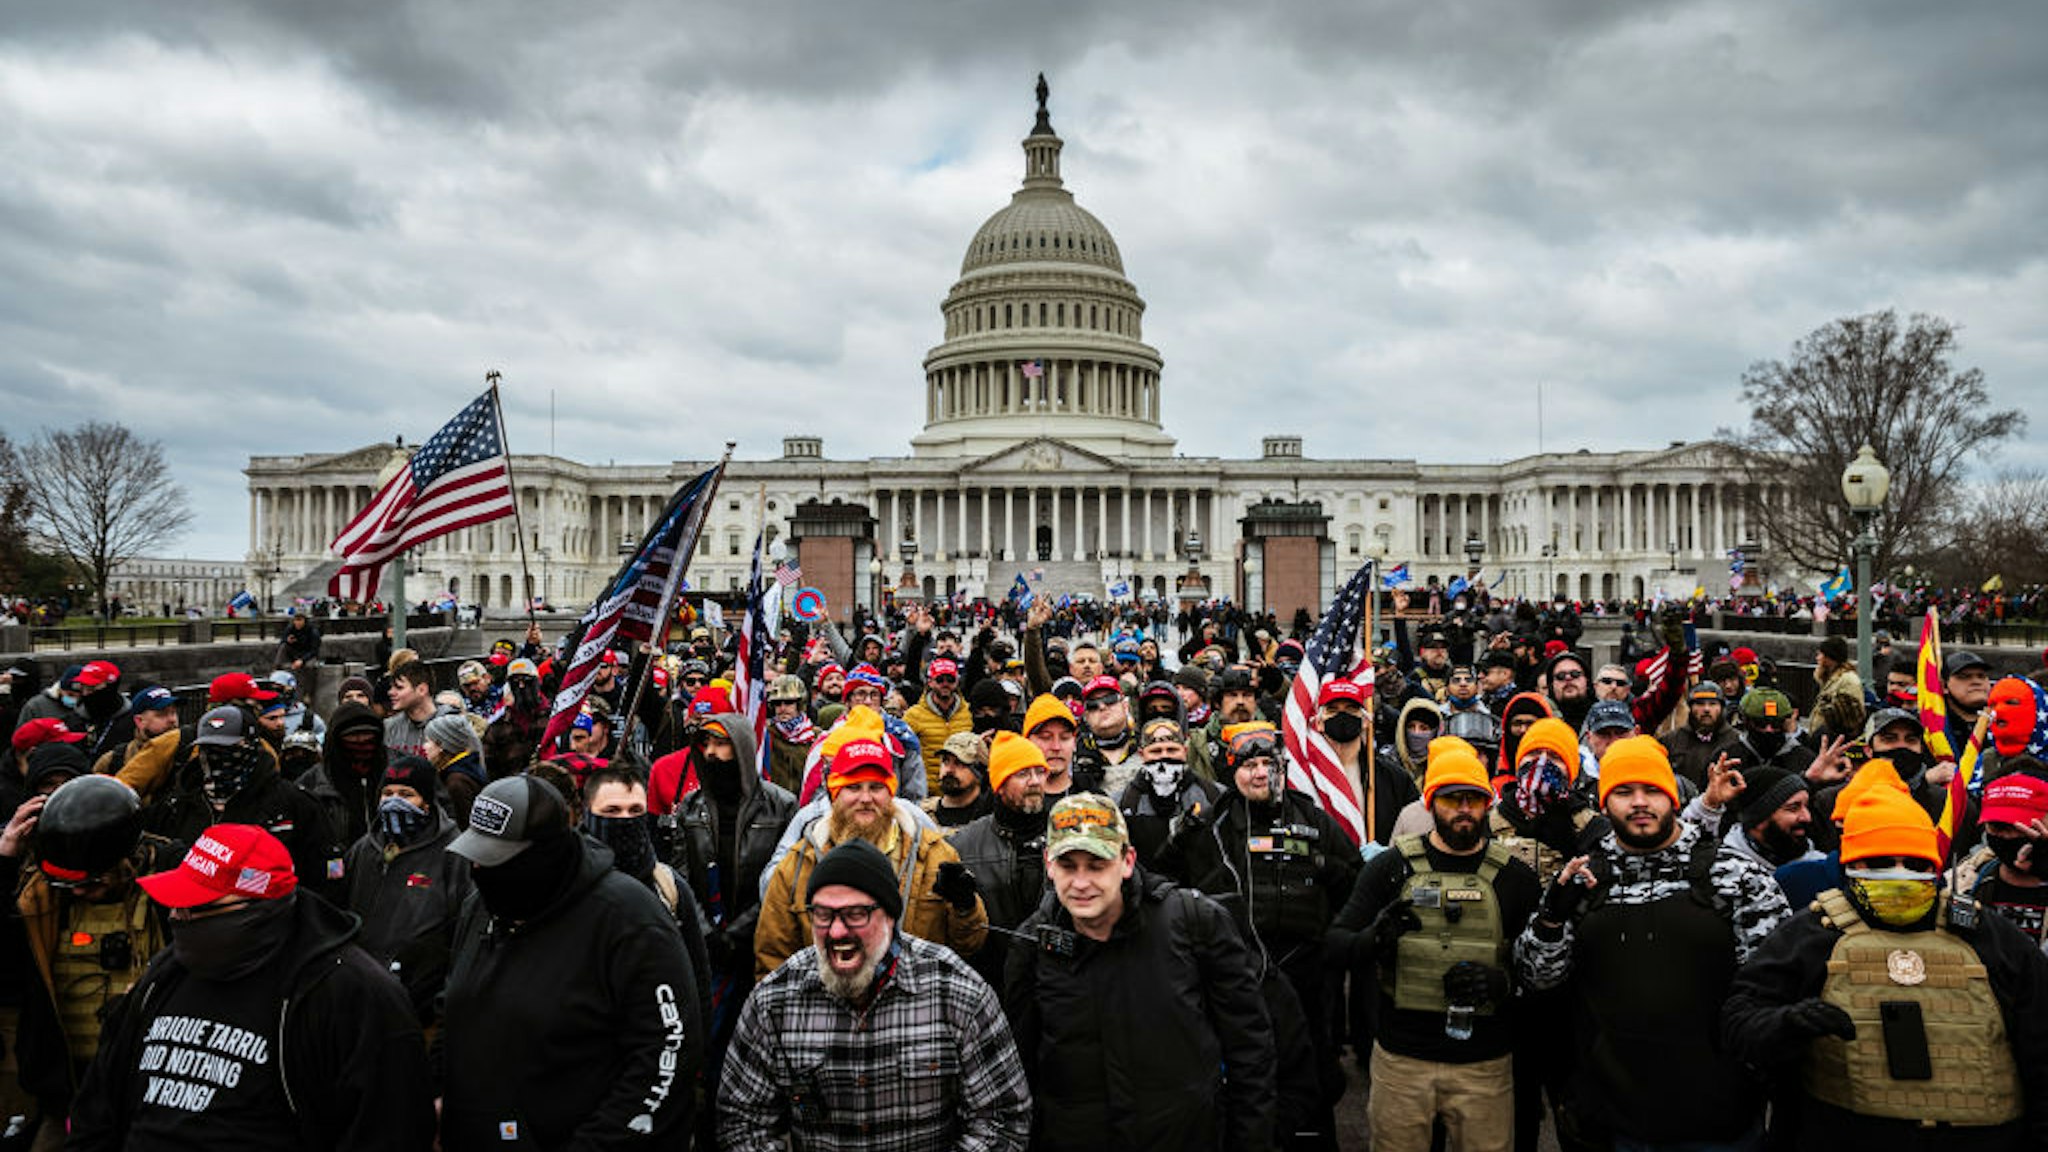 WASHINGTON, DC - JANUARY 06: Pro-Trump protesters gather in front of the U.S. Capitol Building on January 6, 2021 in Washington, DC. A pro-Trump mob stormed the Capitol, breaking windows and clashing with police officers. Trump supporters gathered in the nation's capital today to protest the ratification of President-elect Joe Biden's Electoral College victory over President Trump in the 2020 election. (Photo by Jon Cherry/Getty Images)